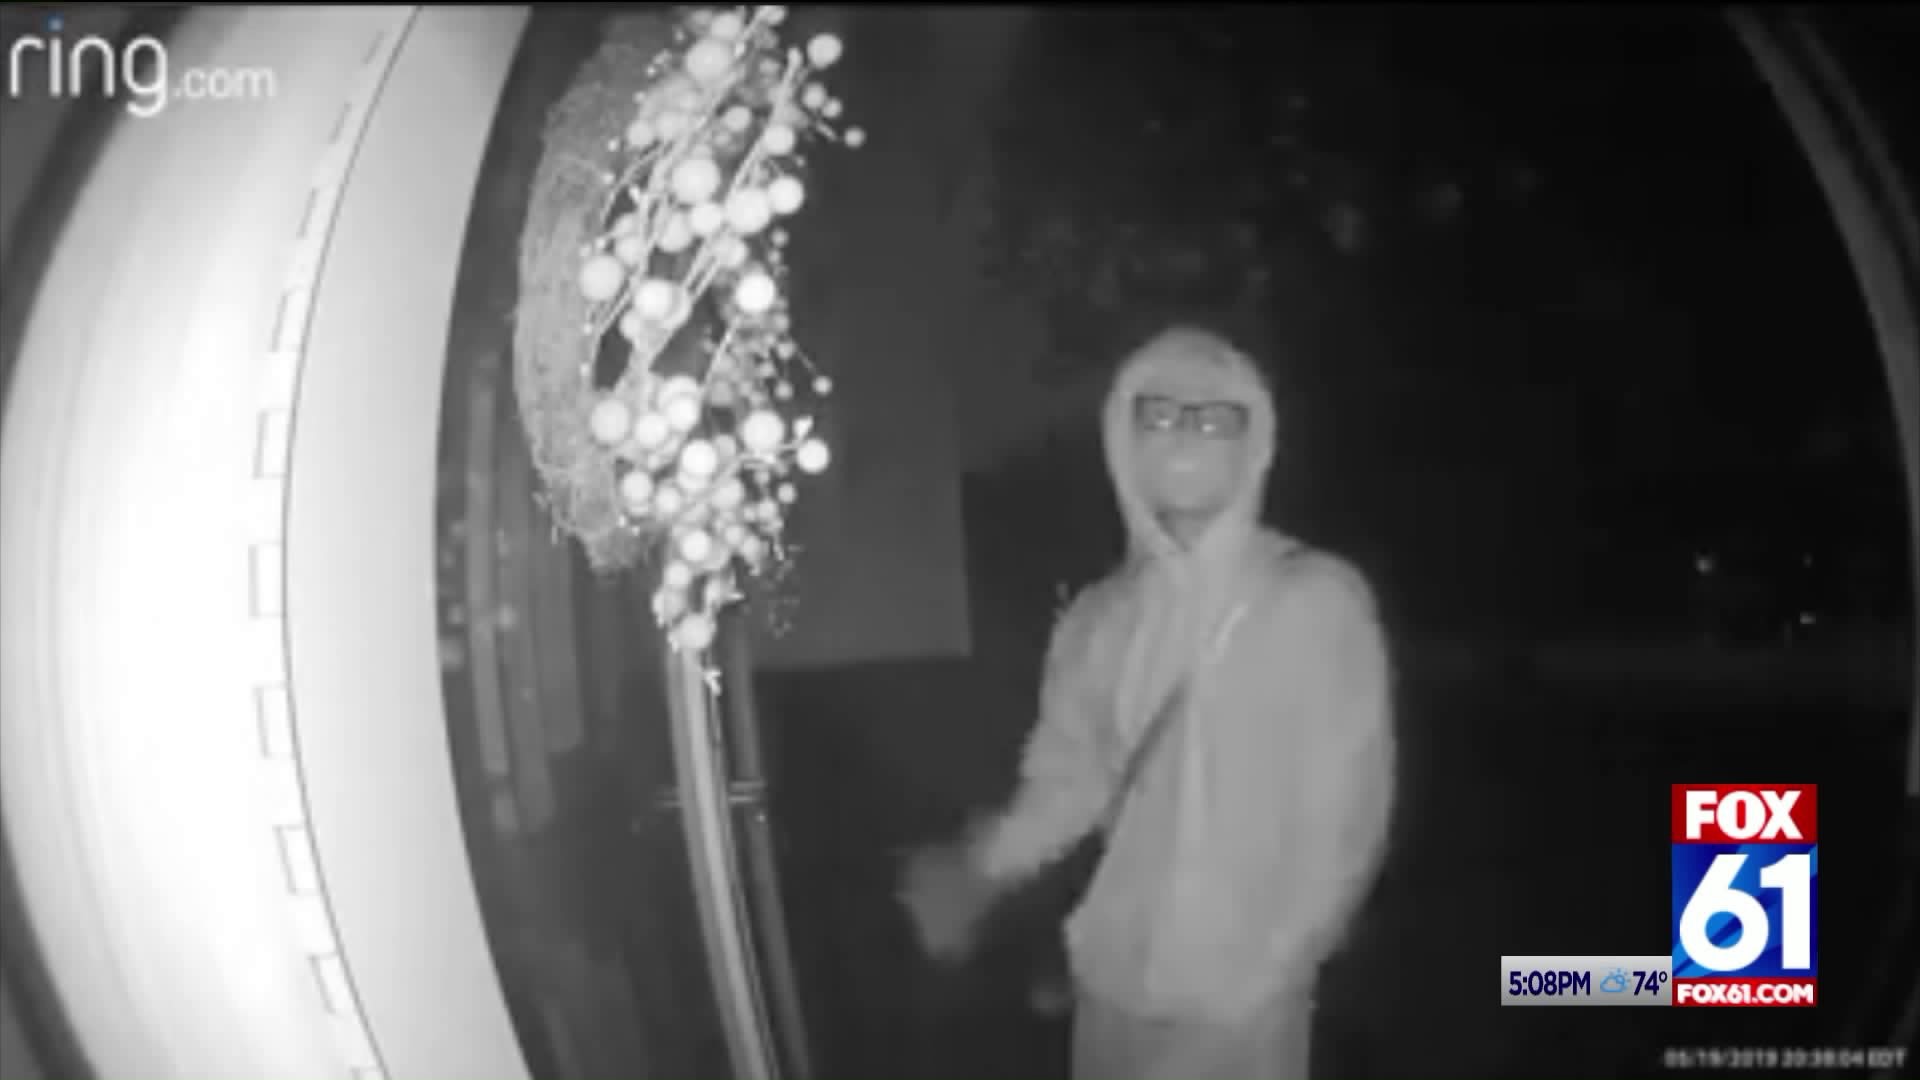 Video shows masked man trying to enter Bristol home